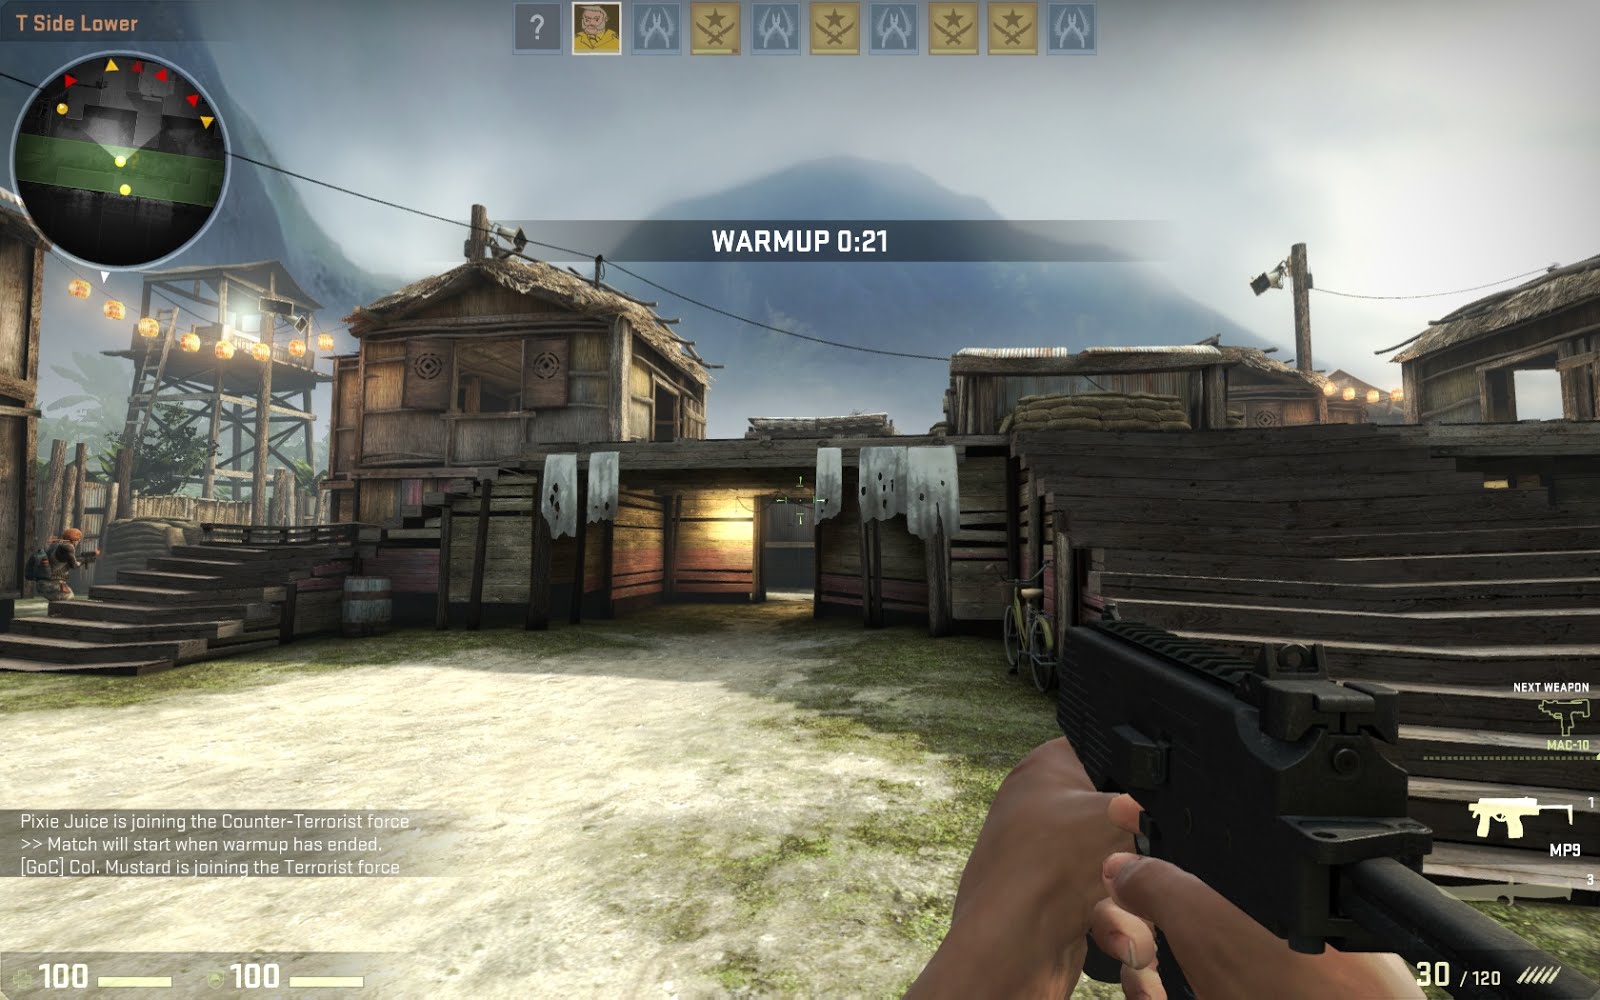 Counter-Strike: Global Offensive on Mac: How to Play & Tests